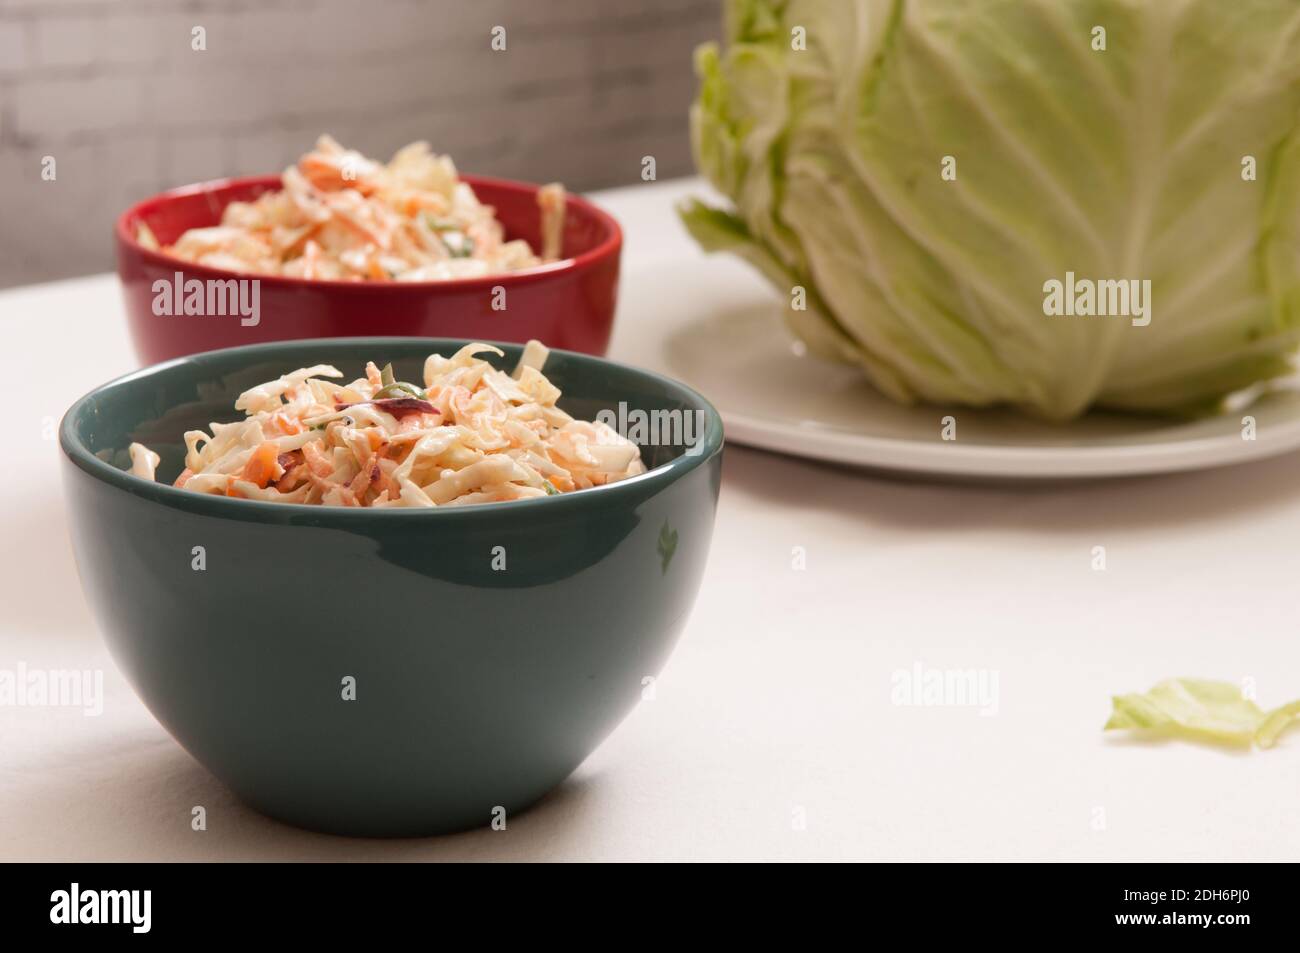 homemade coleslaw made from local farm fresh cabbage Stock Photo